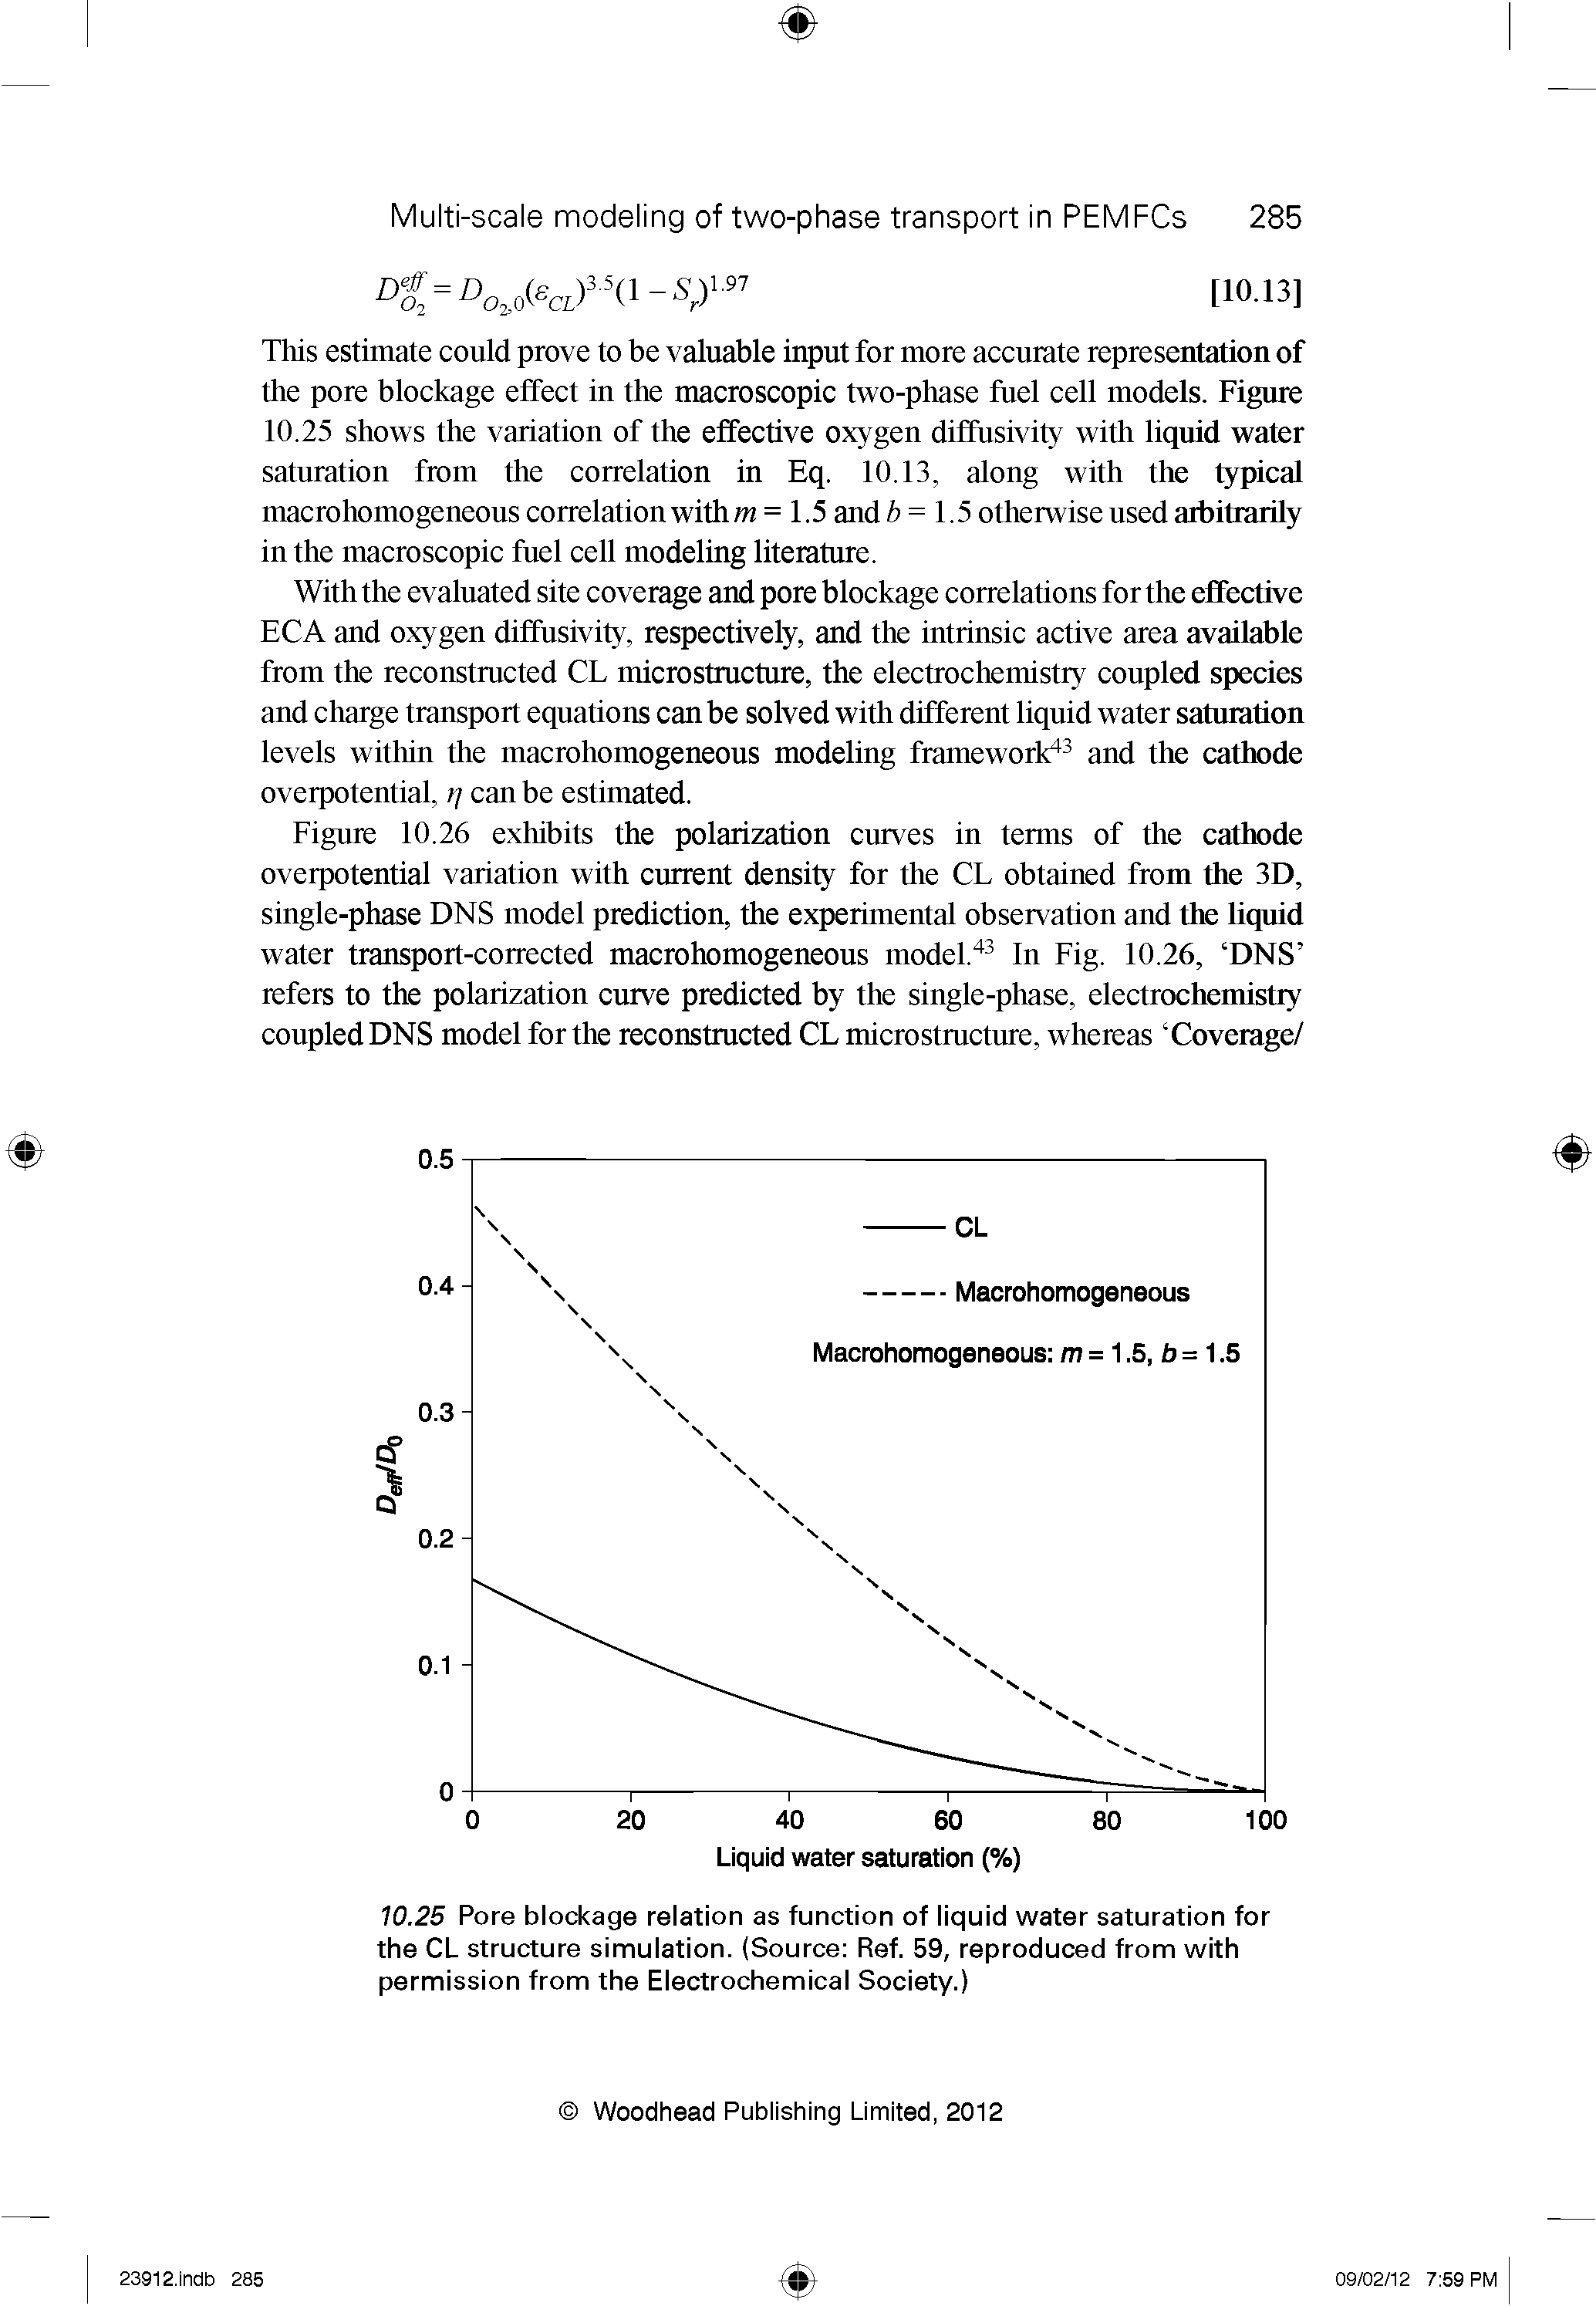 Figure 10.26 exhibits the polarization curves in terms of the cathode overpotential variation with current density for the CL obtained from the 3D, single-phase DNS model prediction, the experimental observation and the liquid water transport-corrected macrohomogeneous model." In Fig. 10.26, DNS refers to the polarization curve predicted by the single-phase, electrochemistry coupled DNS model for the reconstmcted CL microstracture, whereas Coverage/...